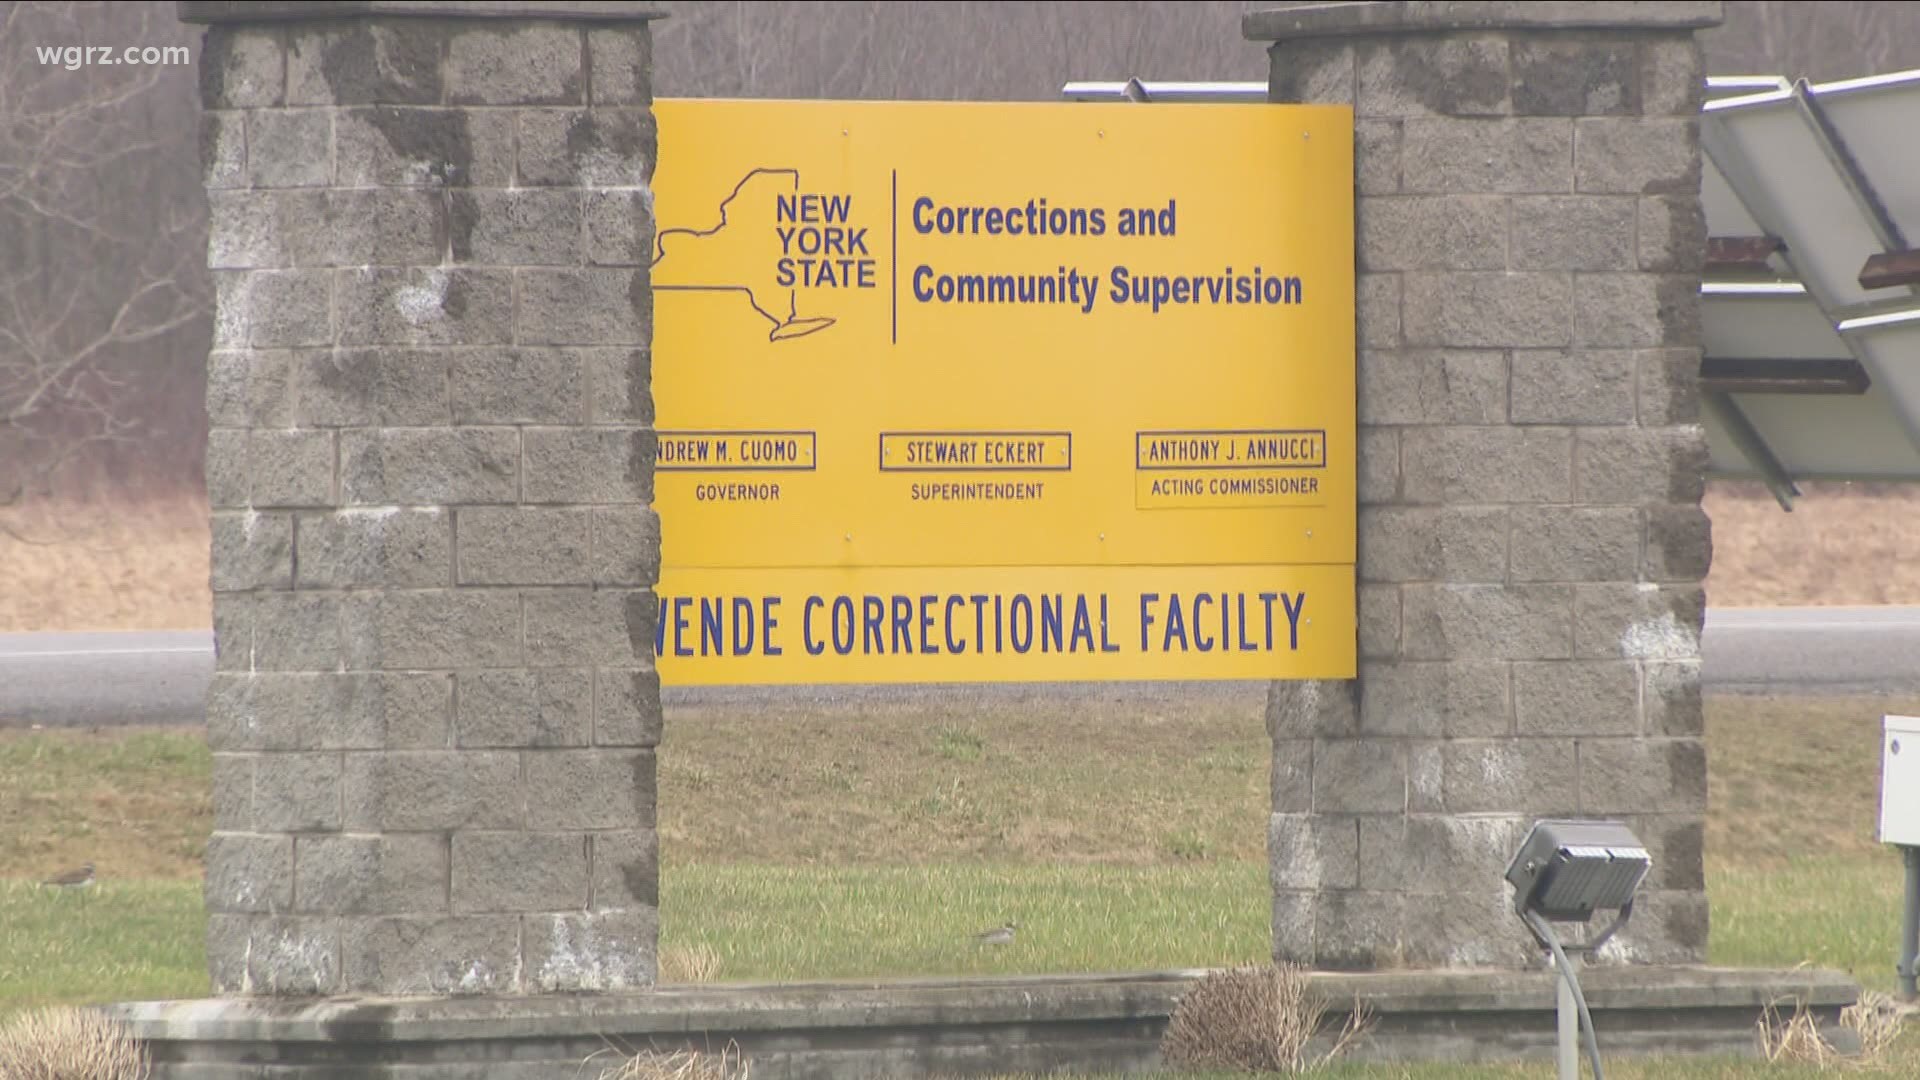 Inmate at Wende Correctional dies from COVID-19 related issues | wgrz.com